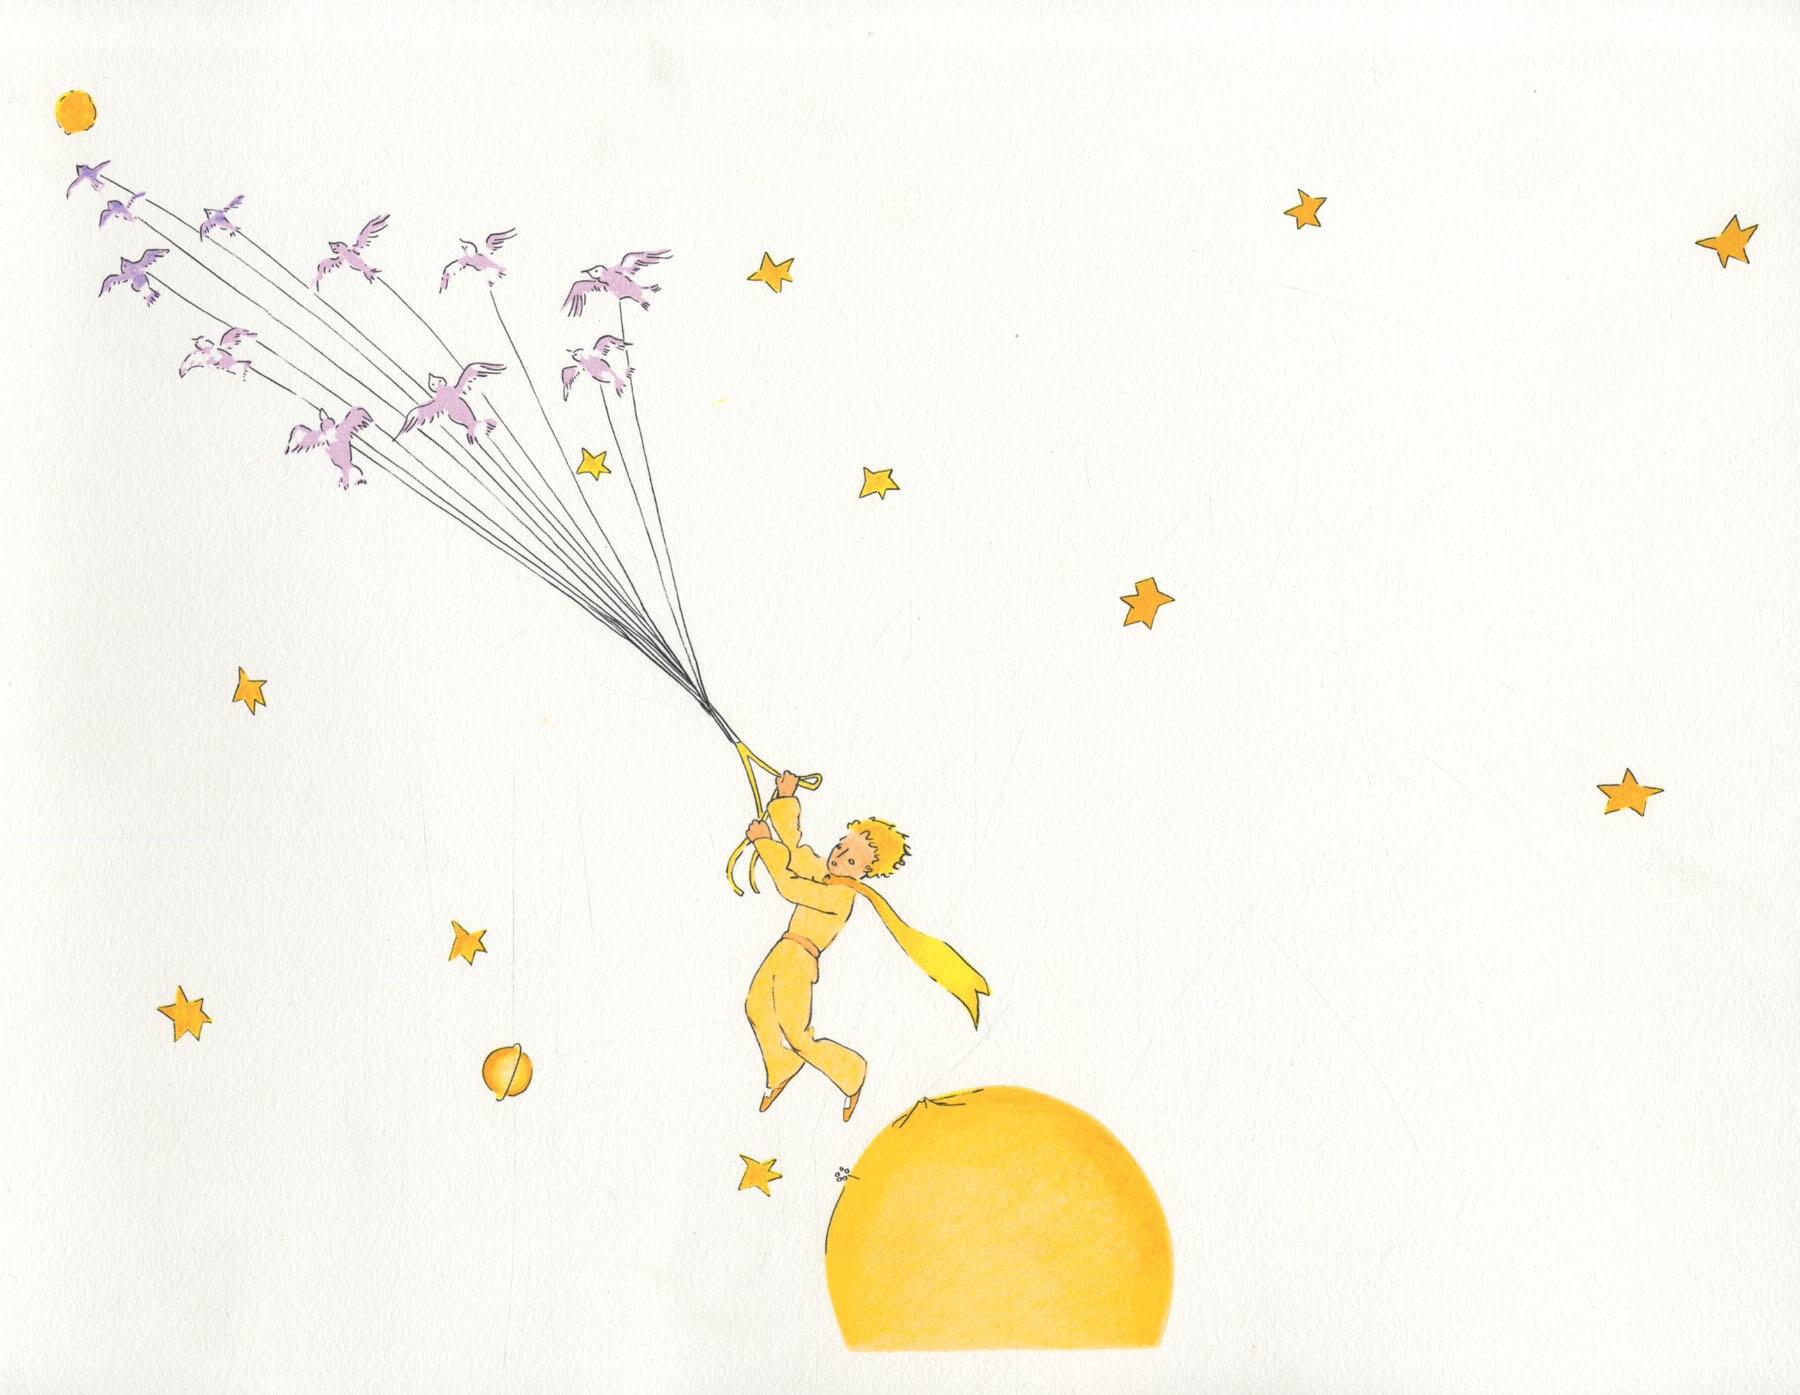 #23 To Have an Innocent Mind Like the Little Prince